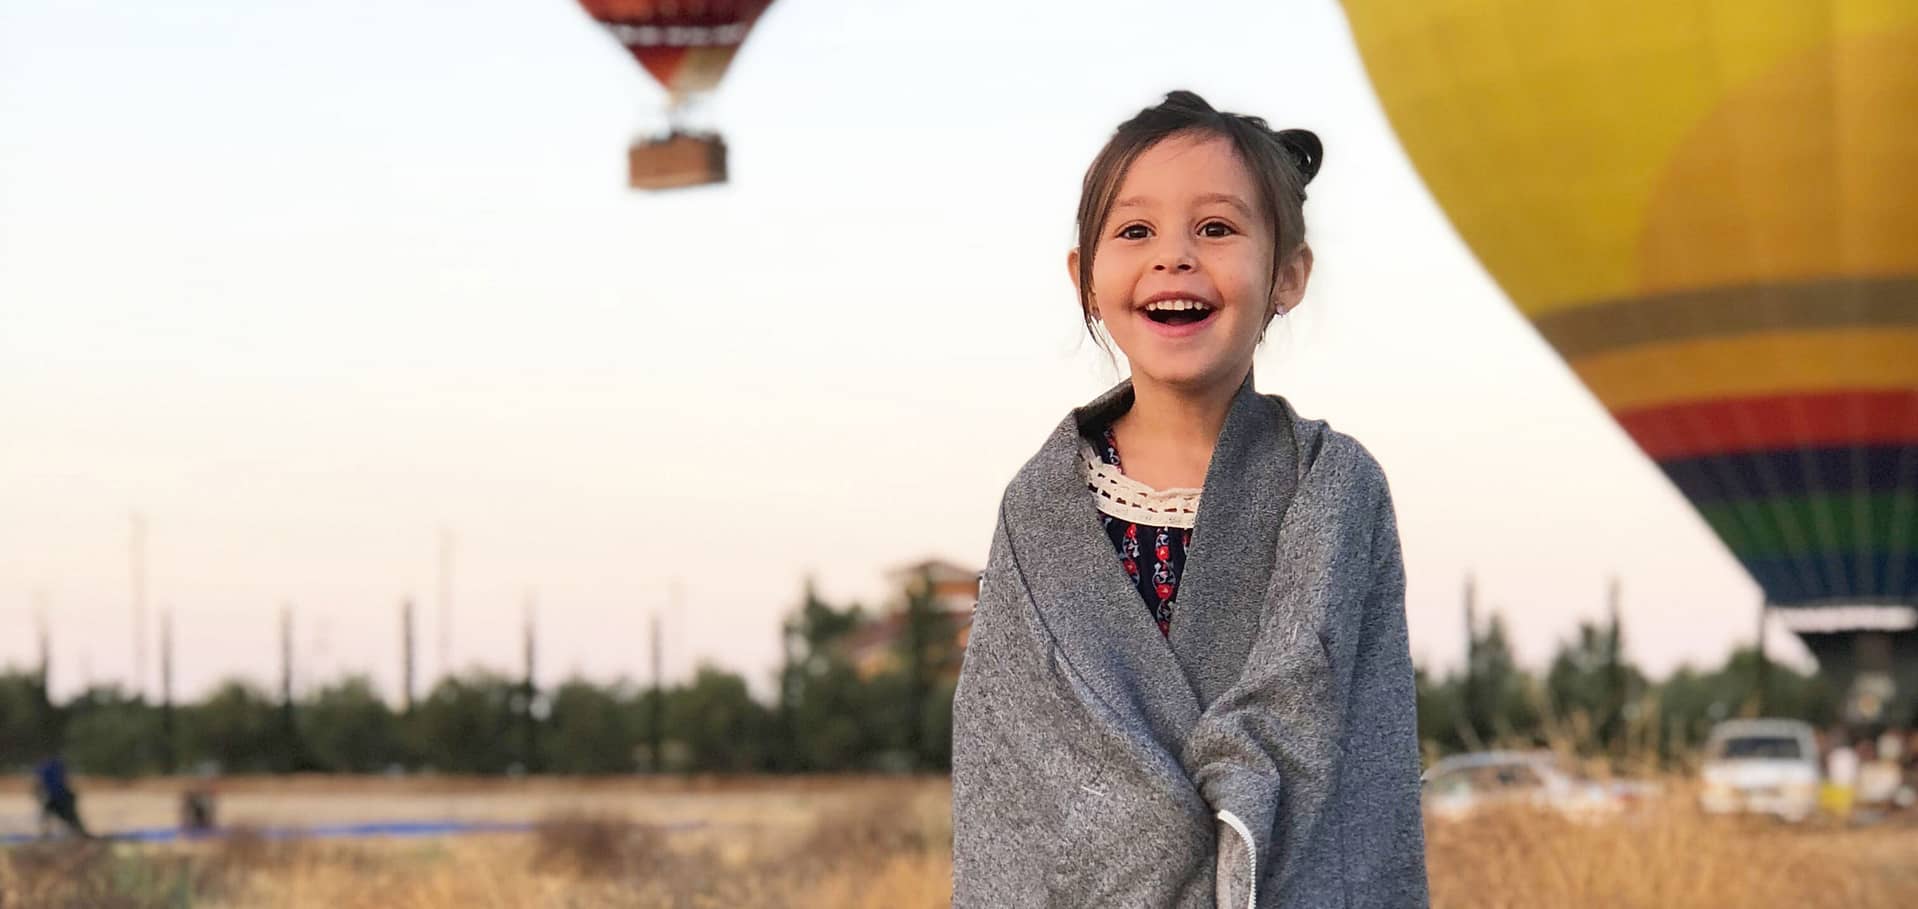 Happy girl smiling with a grey blanket wrapped around her with hot air balloons in the background